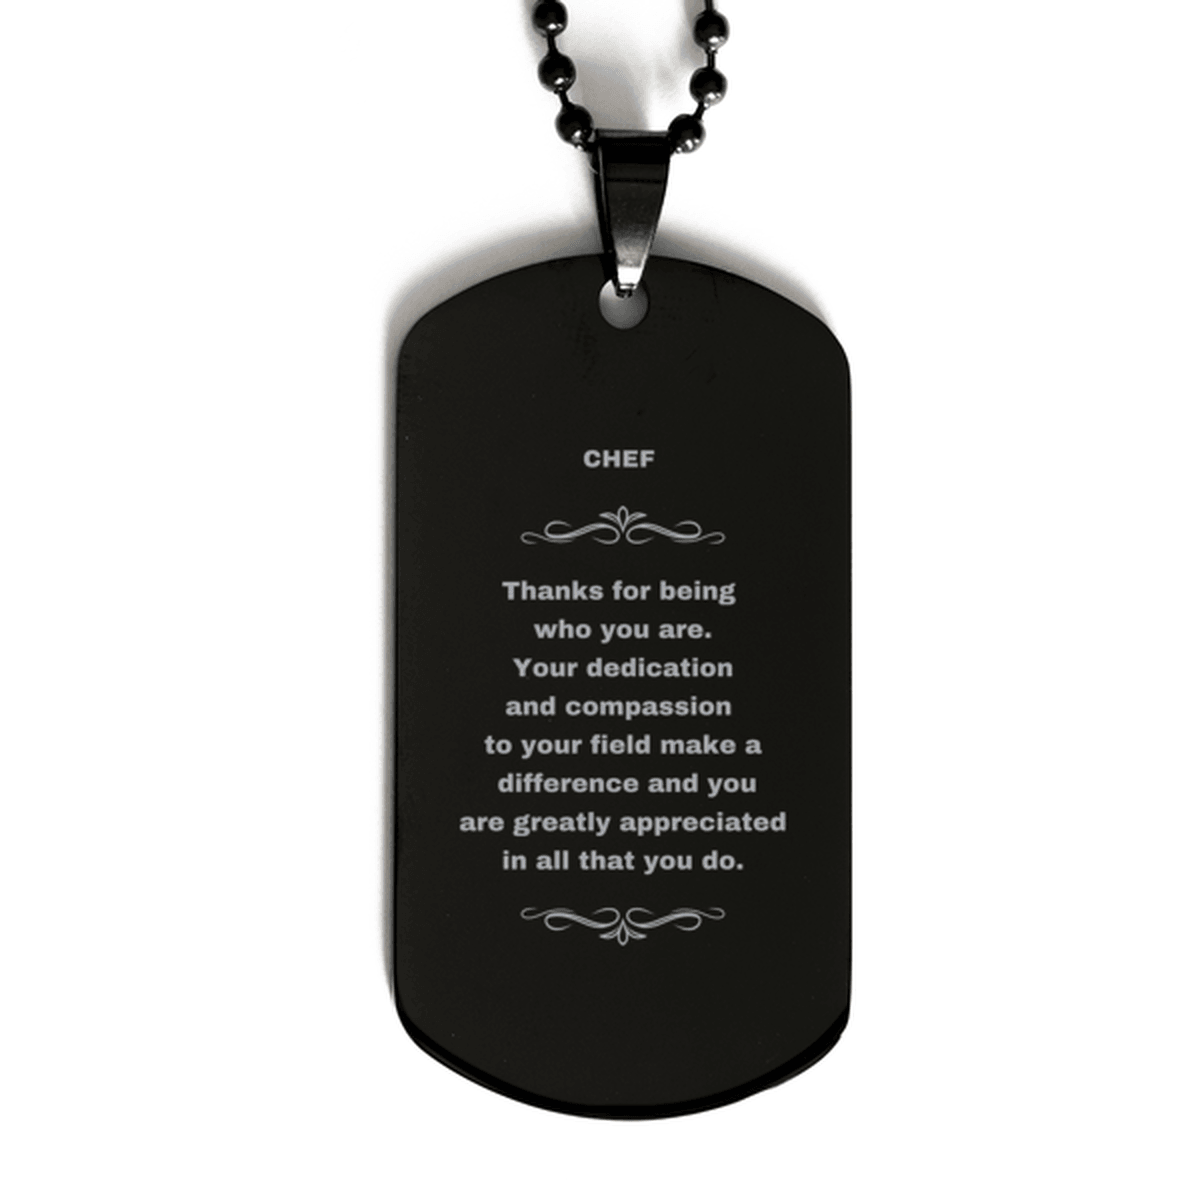 Chef Black Dog Tag Engraved Necklace - Thanks for being who you are - Birthday Christmas Jewelry Gifts Coworkers Colleague Boss - Mallard Moon Gift Shop